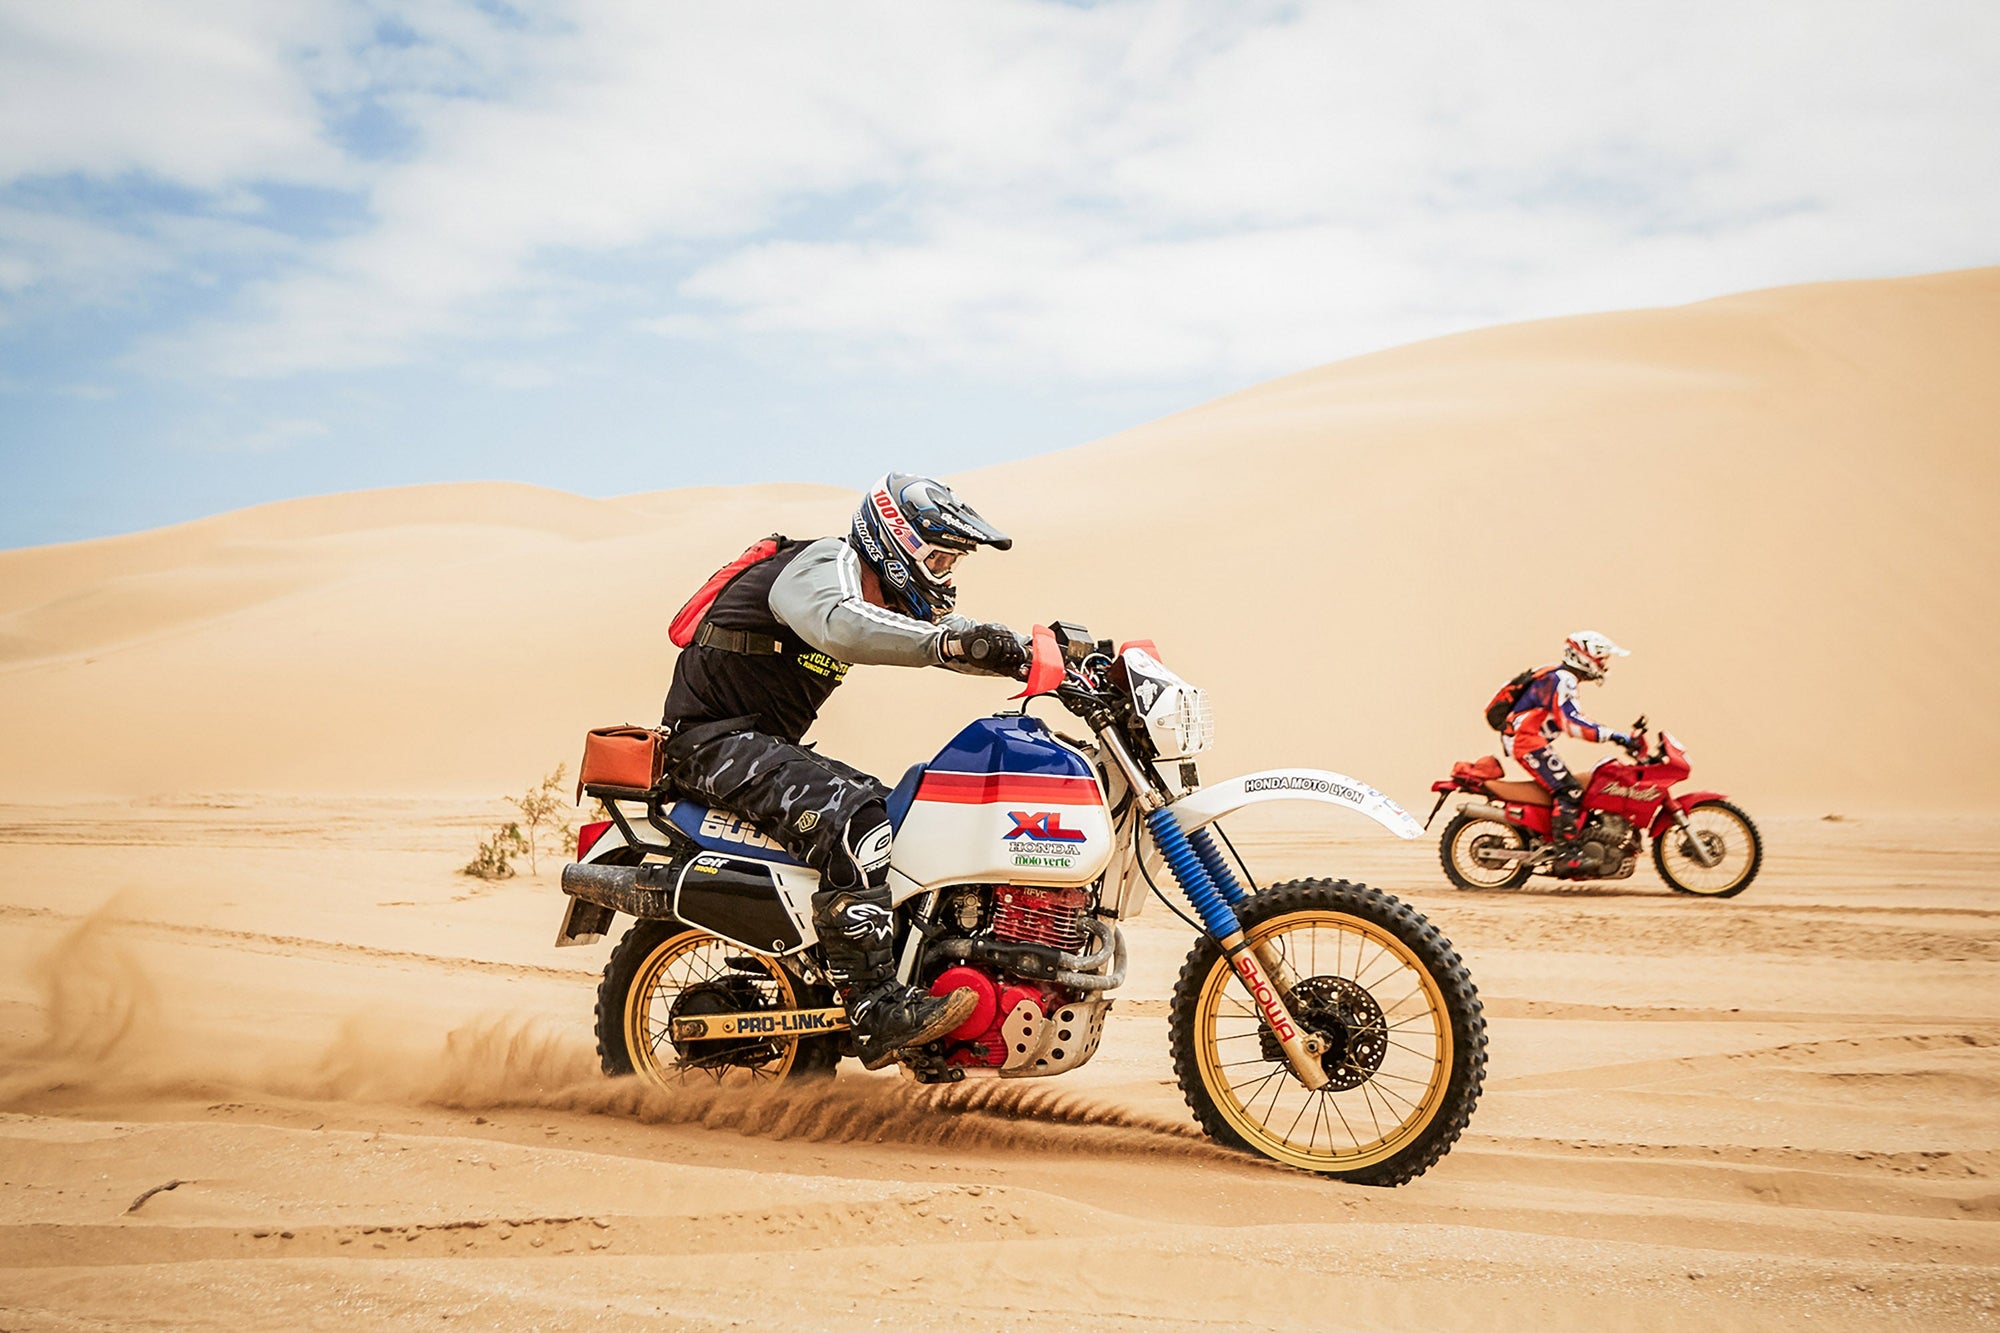 SAND RAIDERS RALLY IN NORTH AFRICAN DUNES